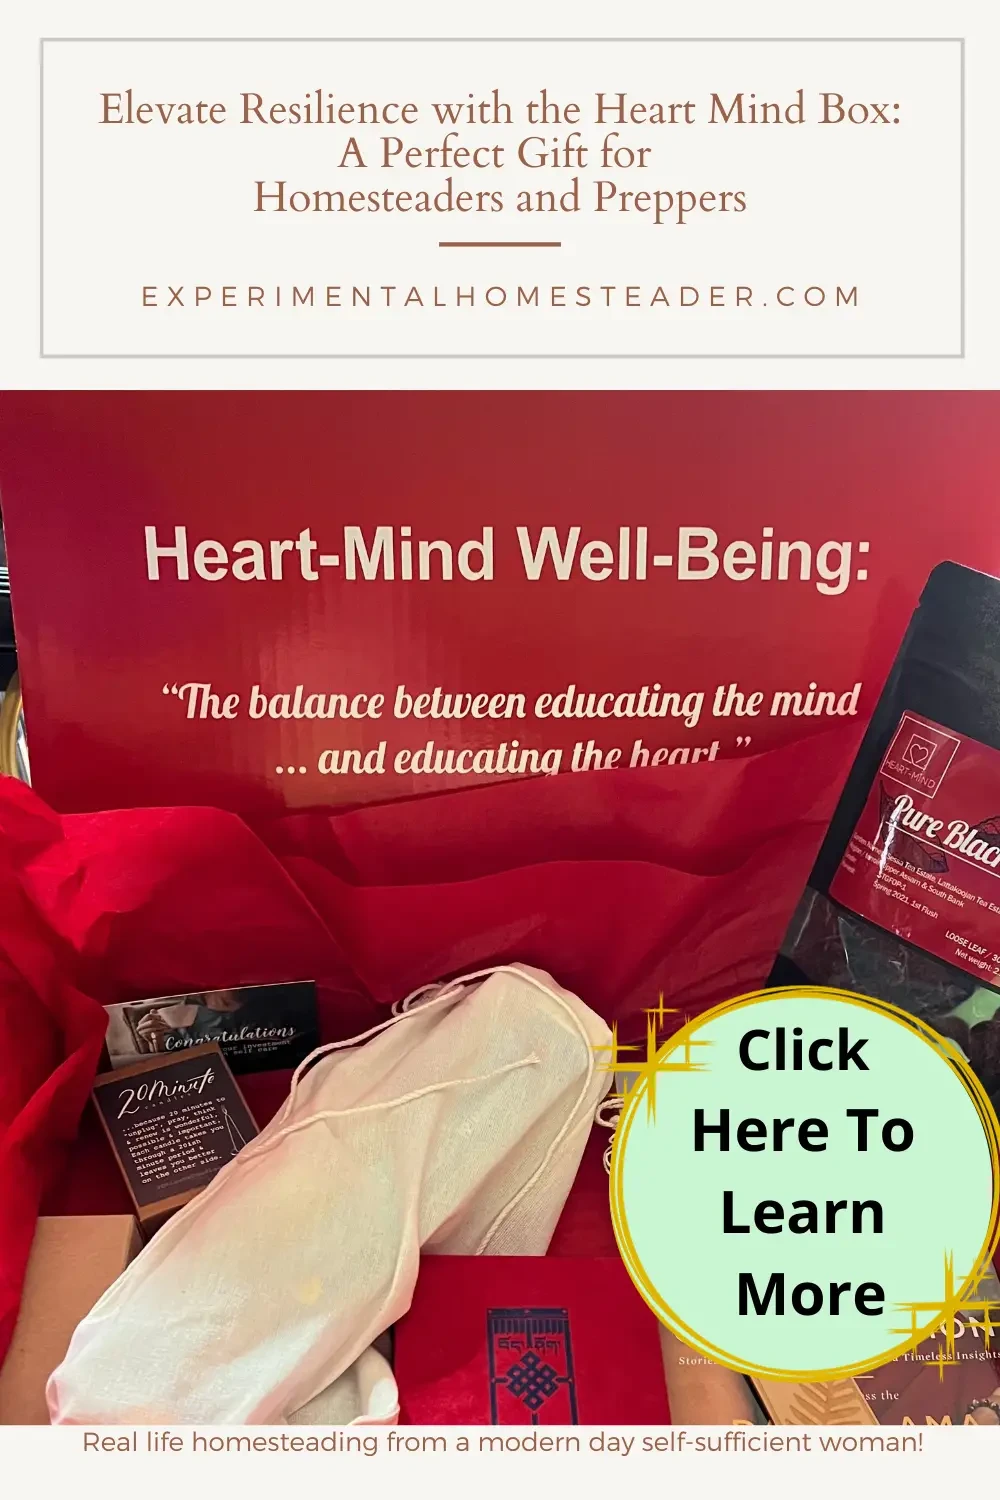 The contents of the Heart Mind Box